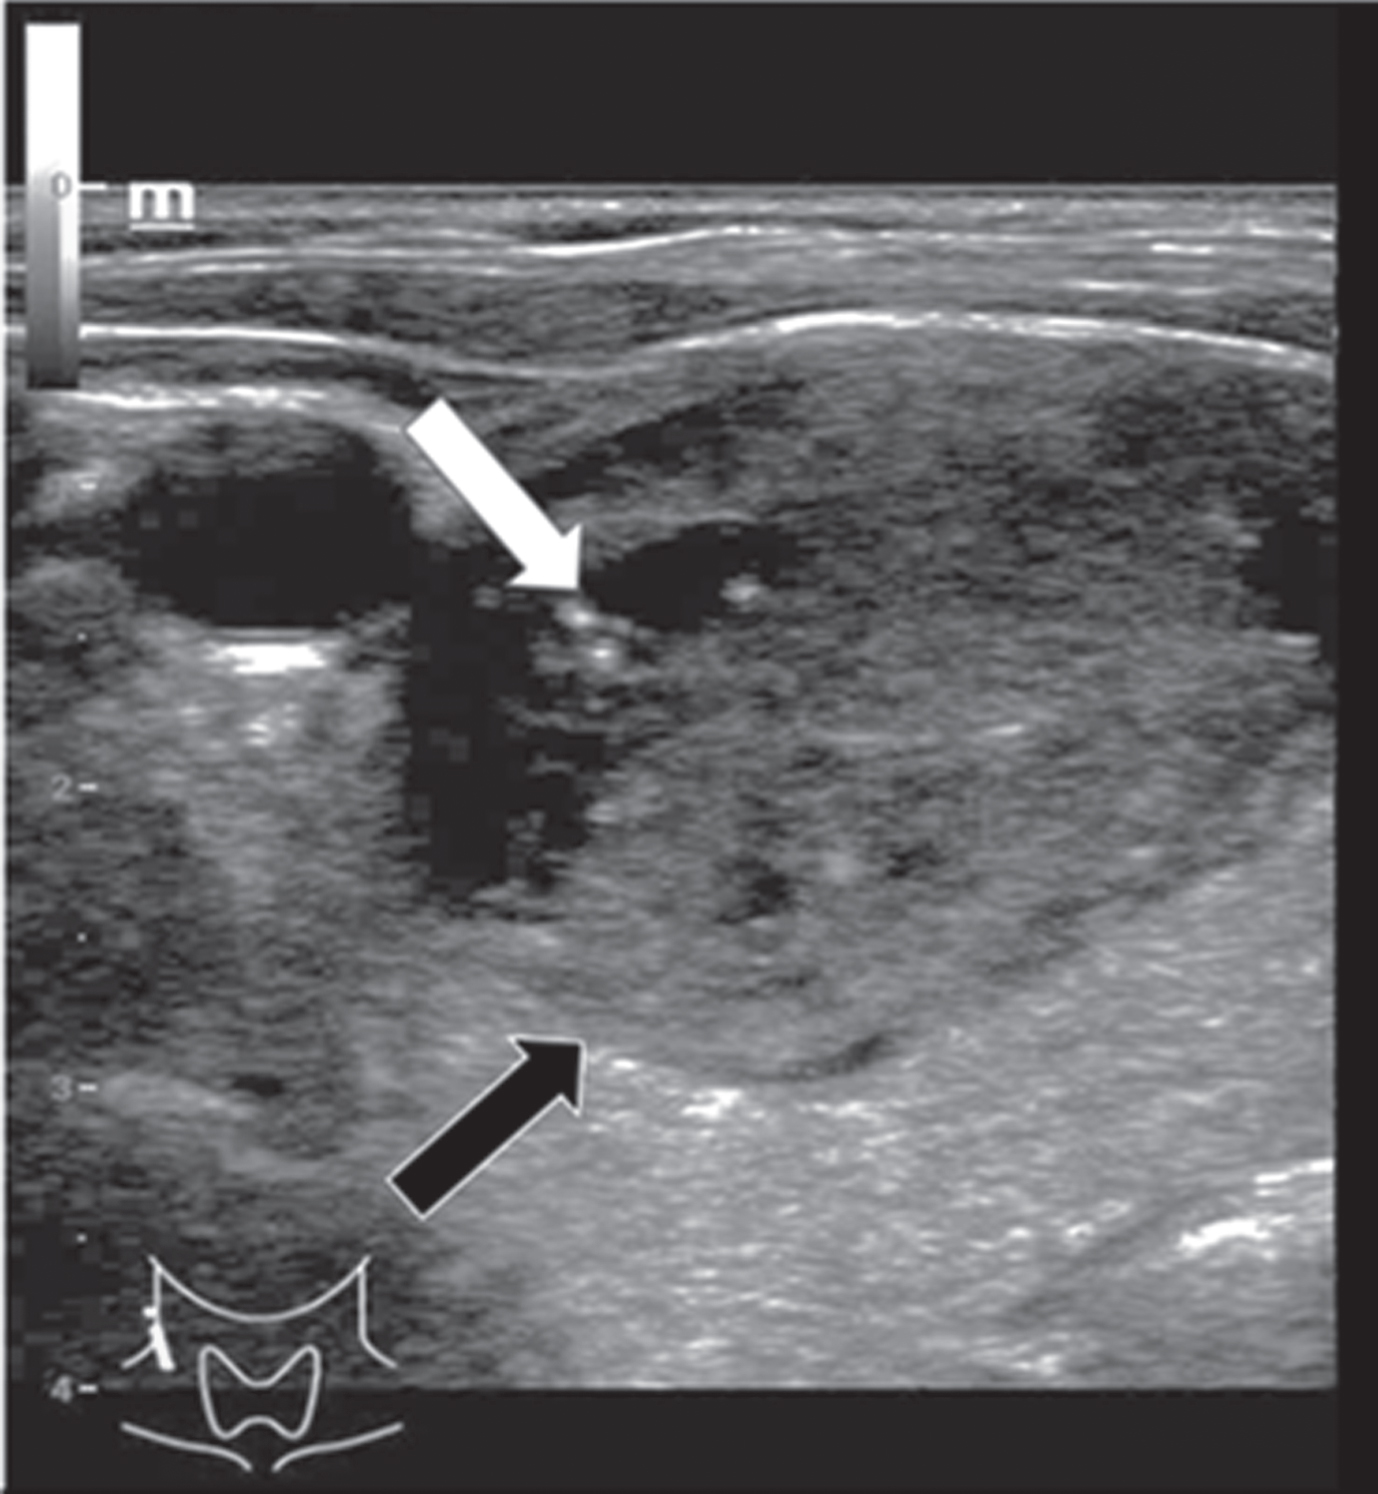 B-mode examination of a right thyroid lobe in cross section of a 61-year-old patient with histo-pathologically proven thyroid adenoma. Micro-calcifications (white arrow) as well as a rather incomplete margin (black arrow) can be spotted in this image. There are strong differences between the echogenicity of the adenoma, in particular its margins, and the surrounding thyroid tissue.